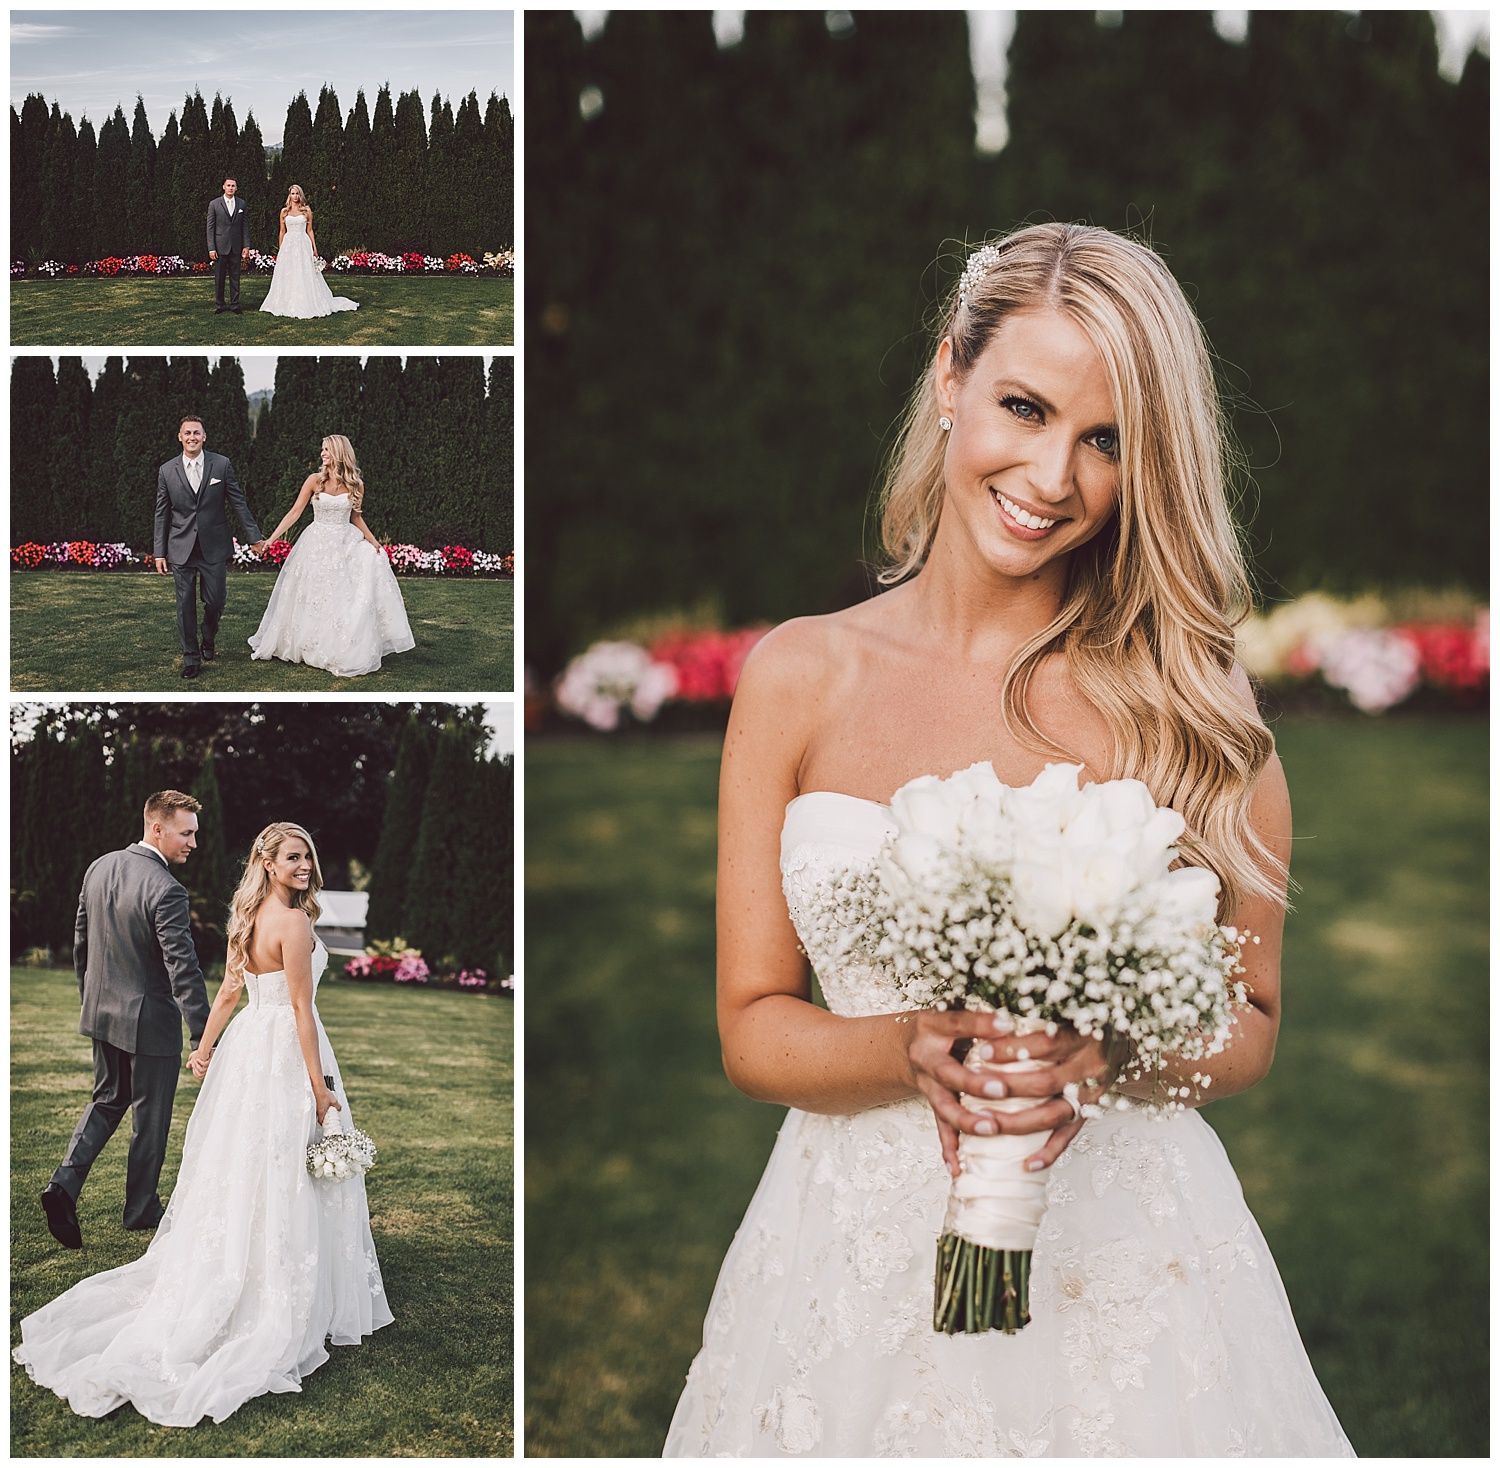 Lord Hill Farms wedding venue in Snohomish, WA by Snohomish Wedding Photographer Kyle Goldie, Luma Weddings